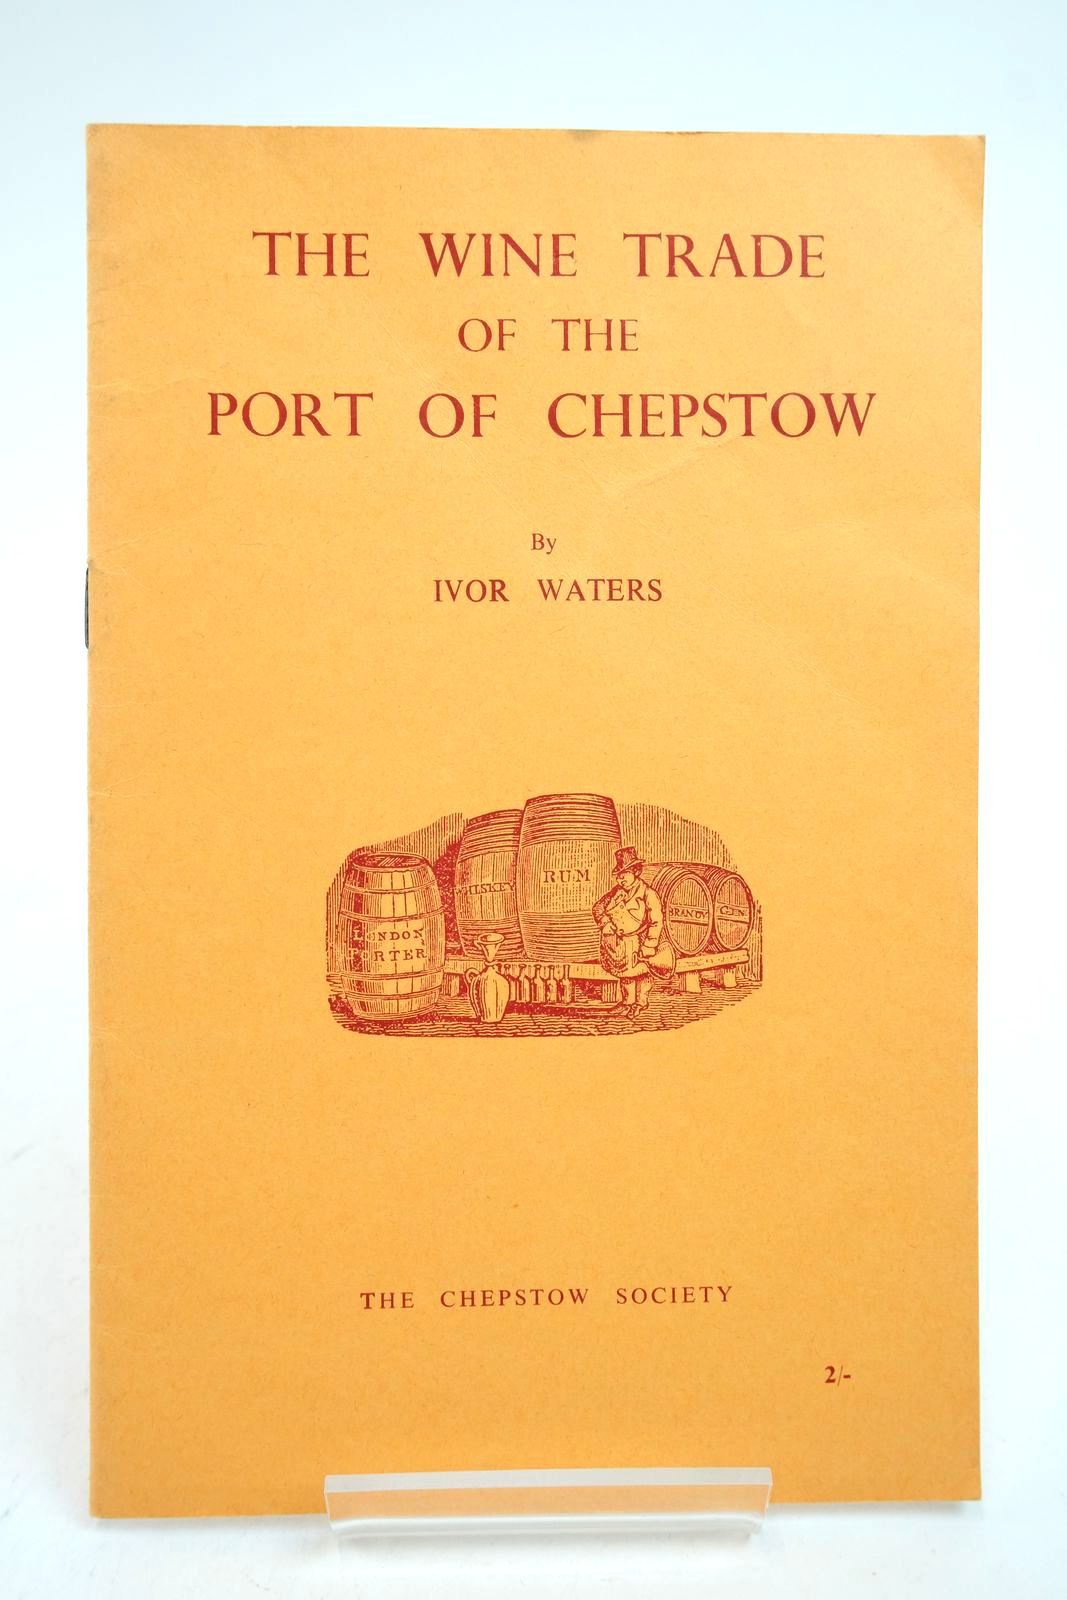 Photo of THE WINE TRADE OF THE PORT OF CHEPSTOW written by Waters, Ivor published by The Chepstow Society (STOCK CODE: 2140444)  for sale by Stella & Rose's Books